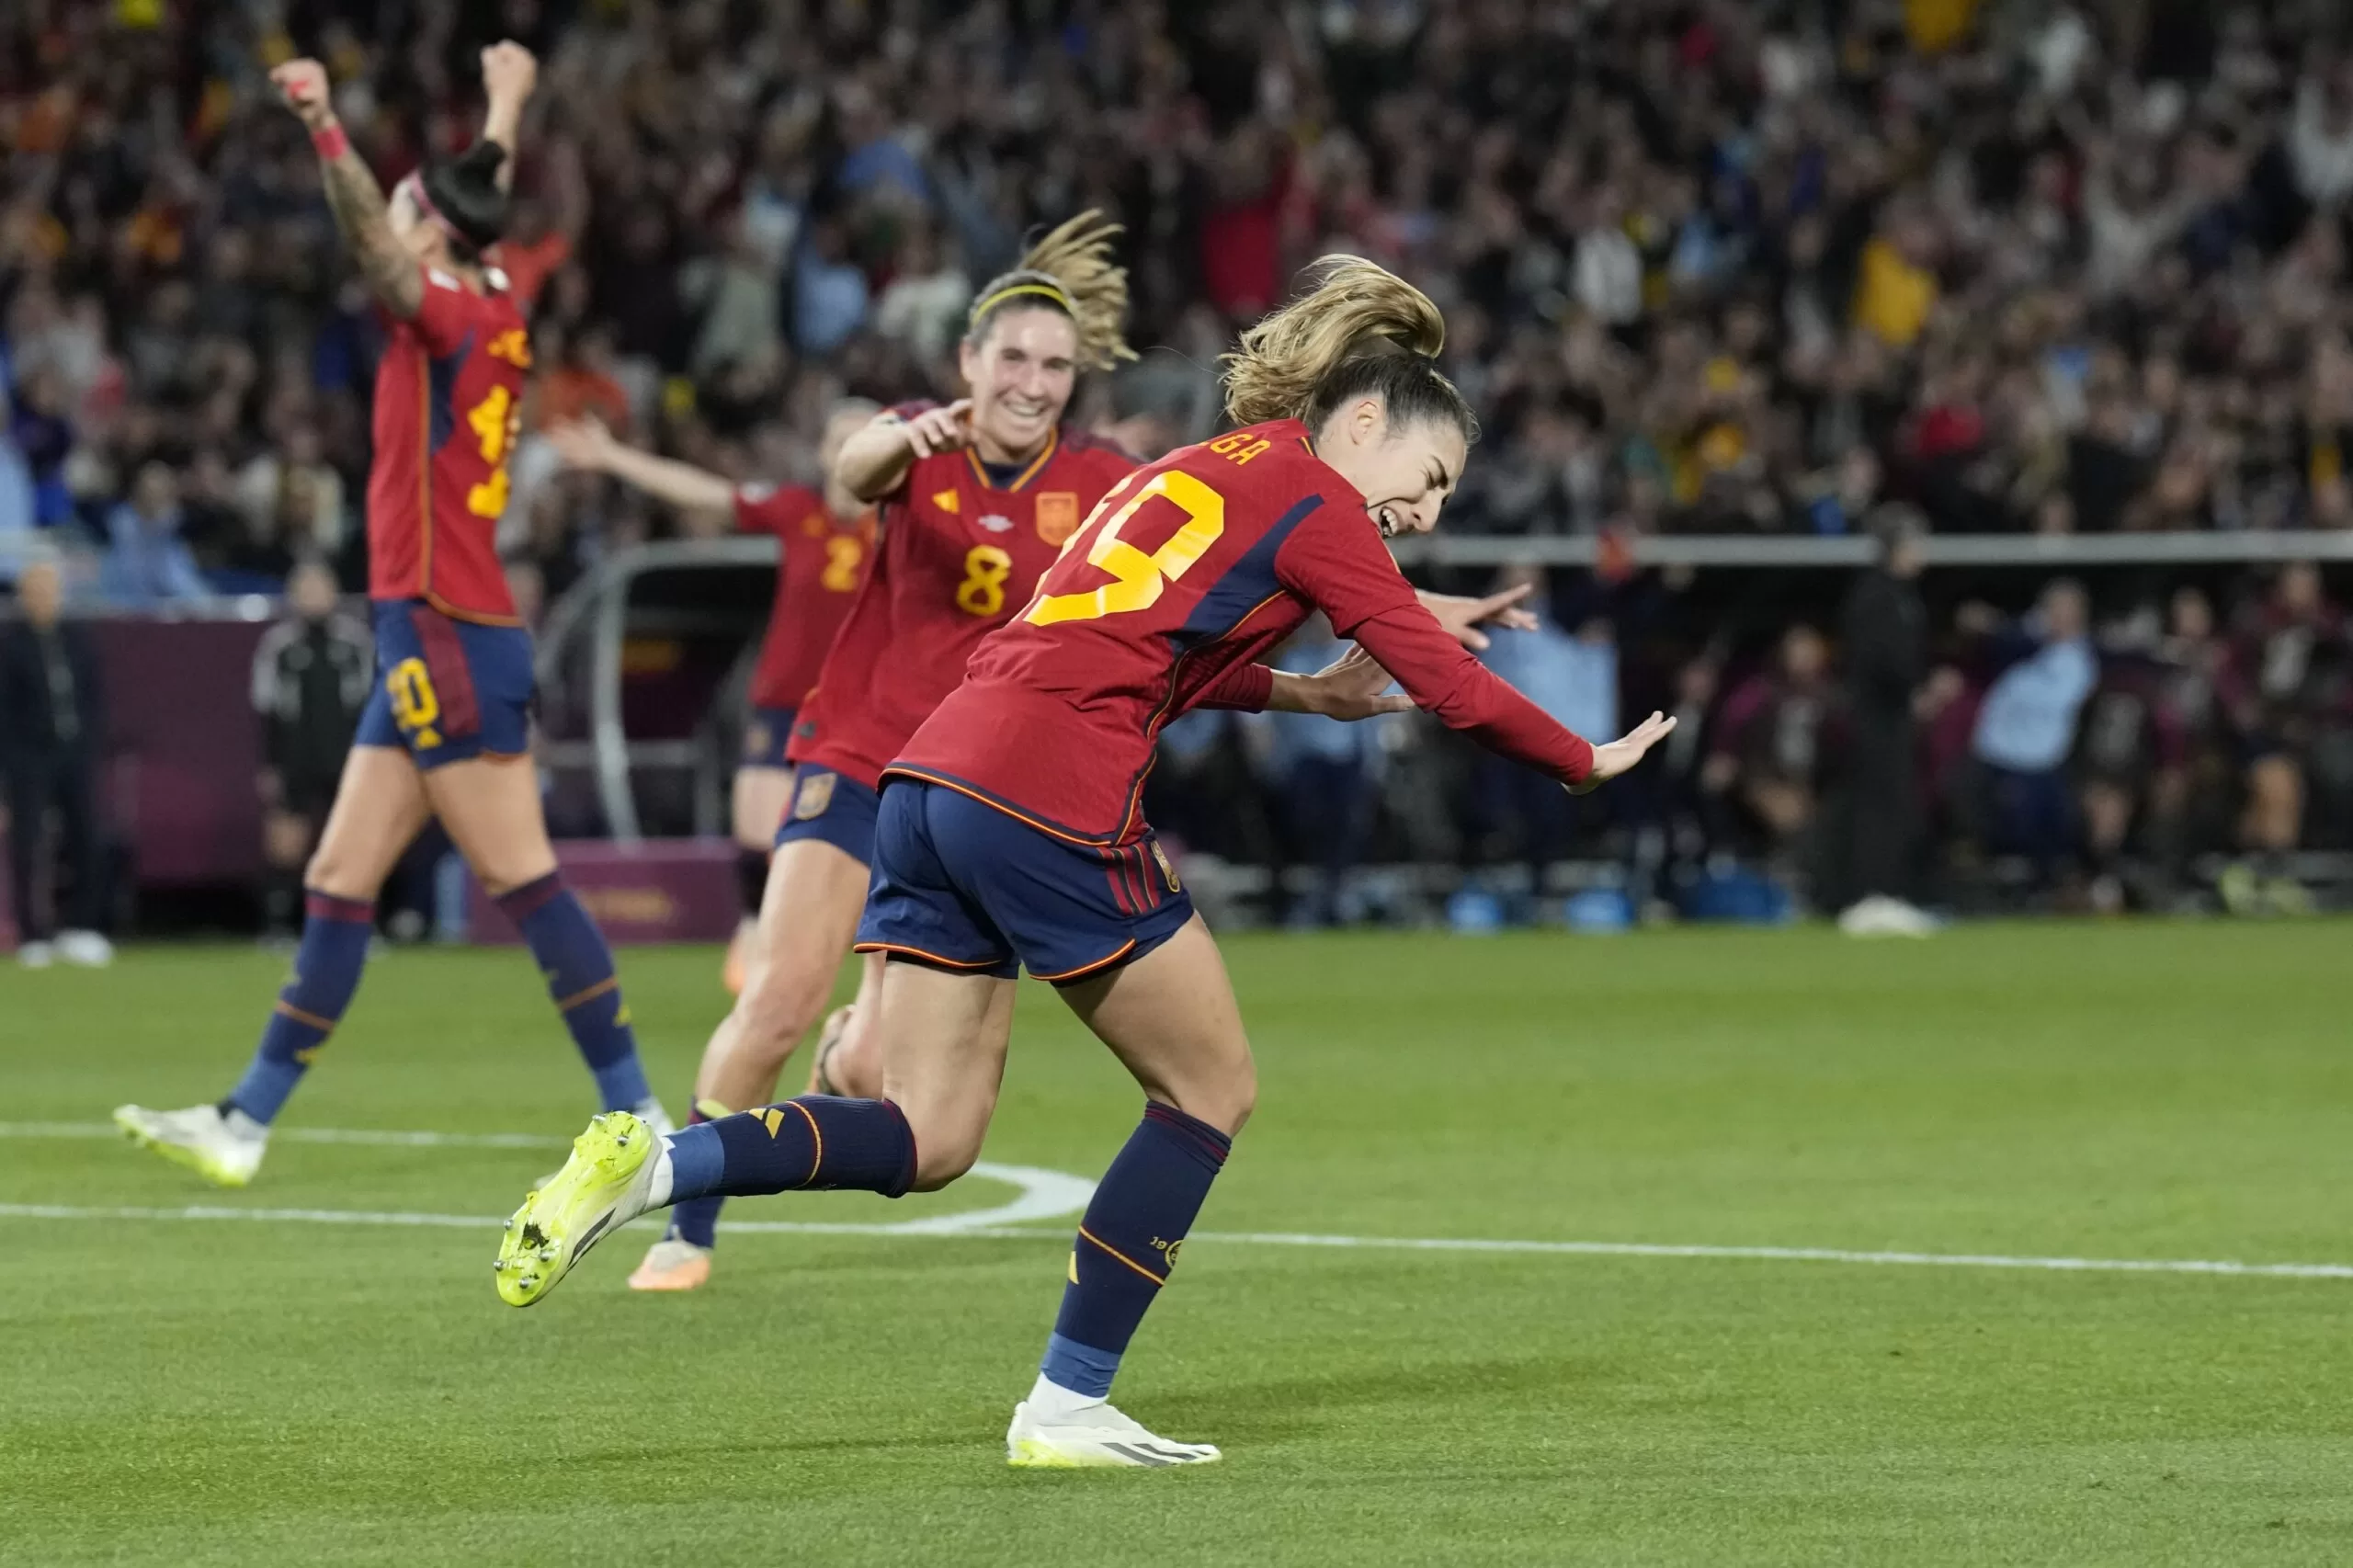 Spain wins its first Women’s World Cup title, beating England 1-0 in the final
